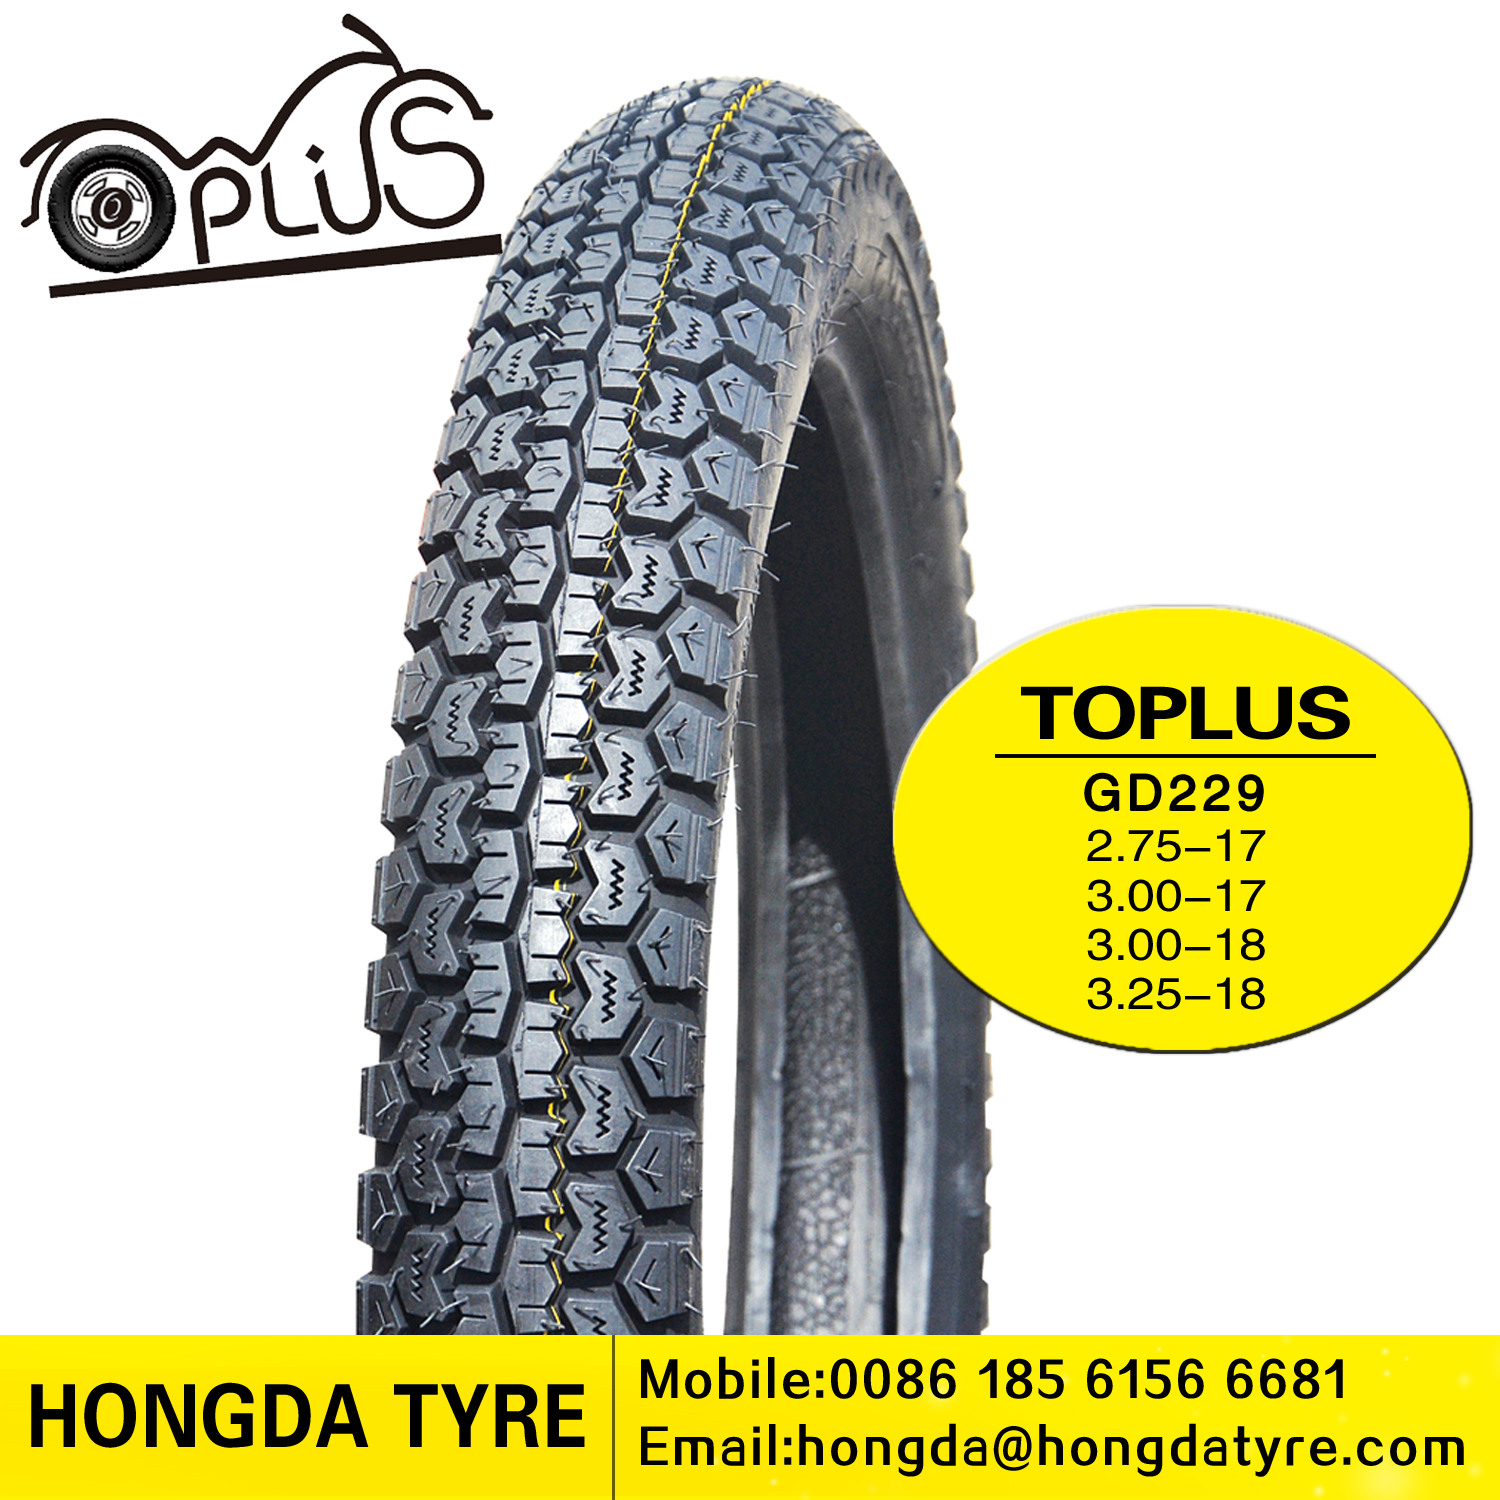 Motorcycle tyre GD229